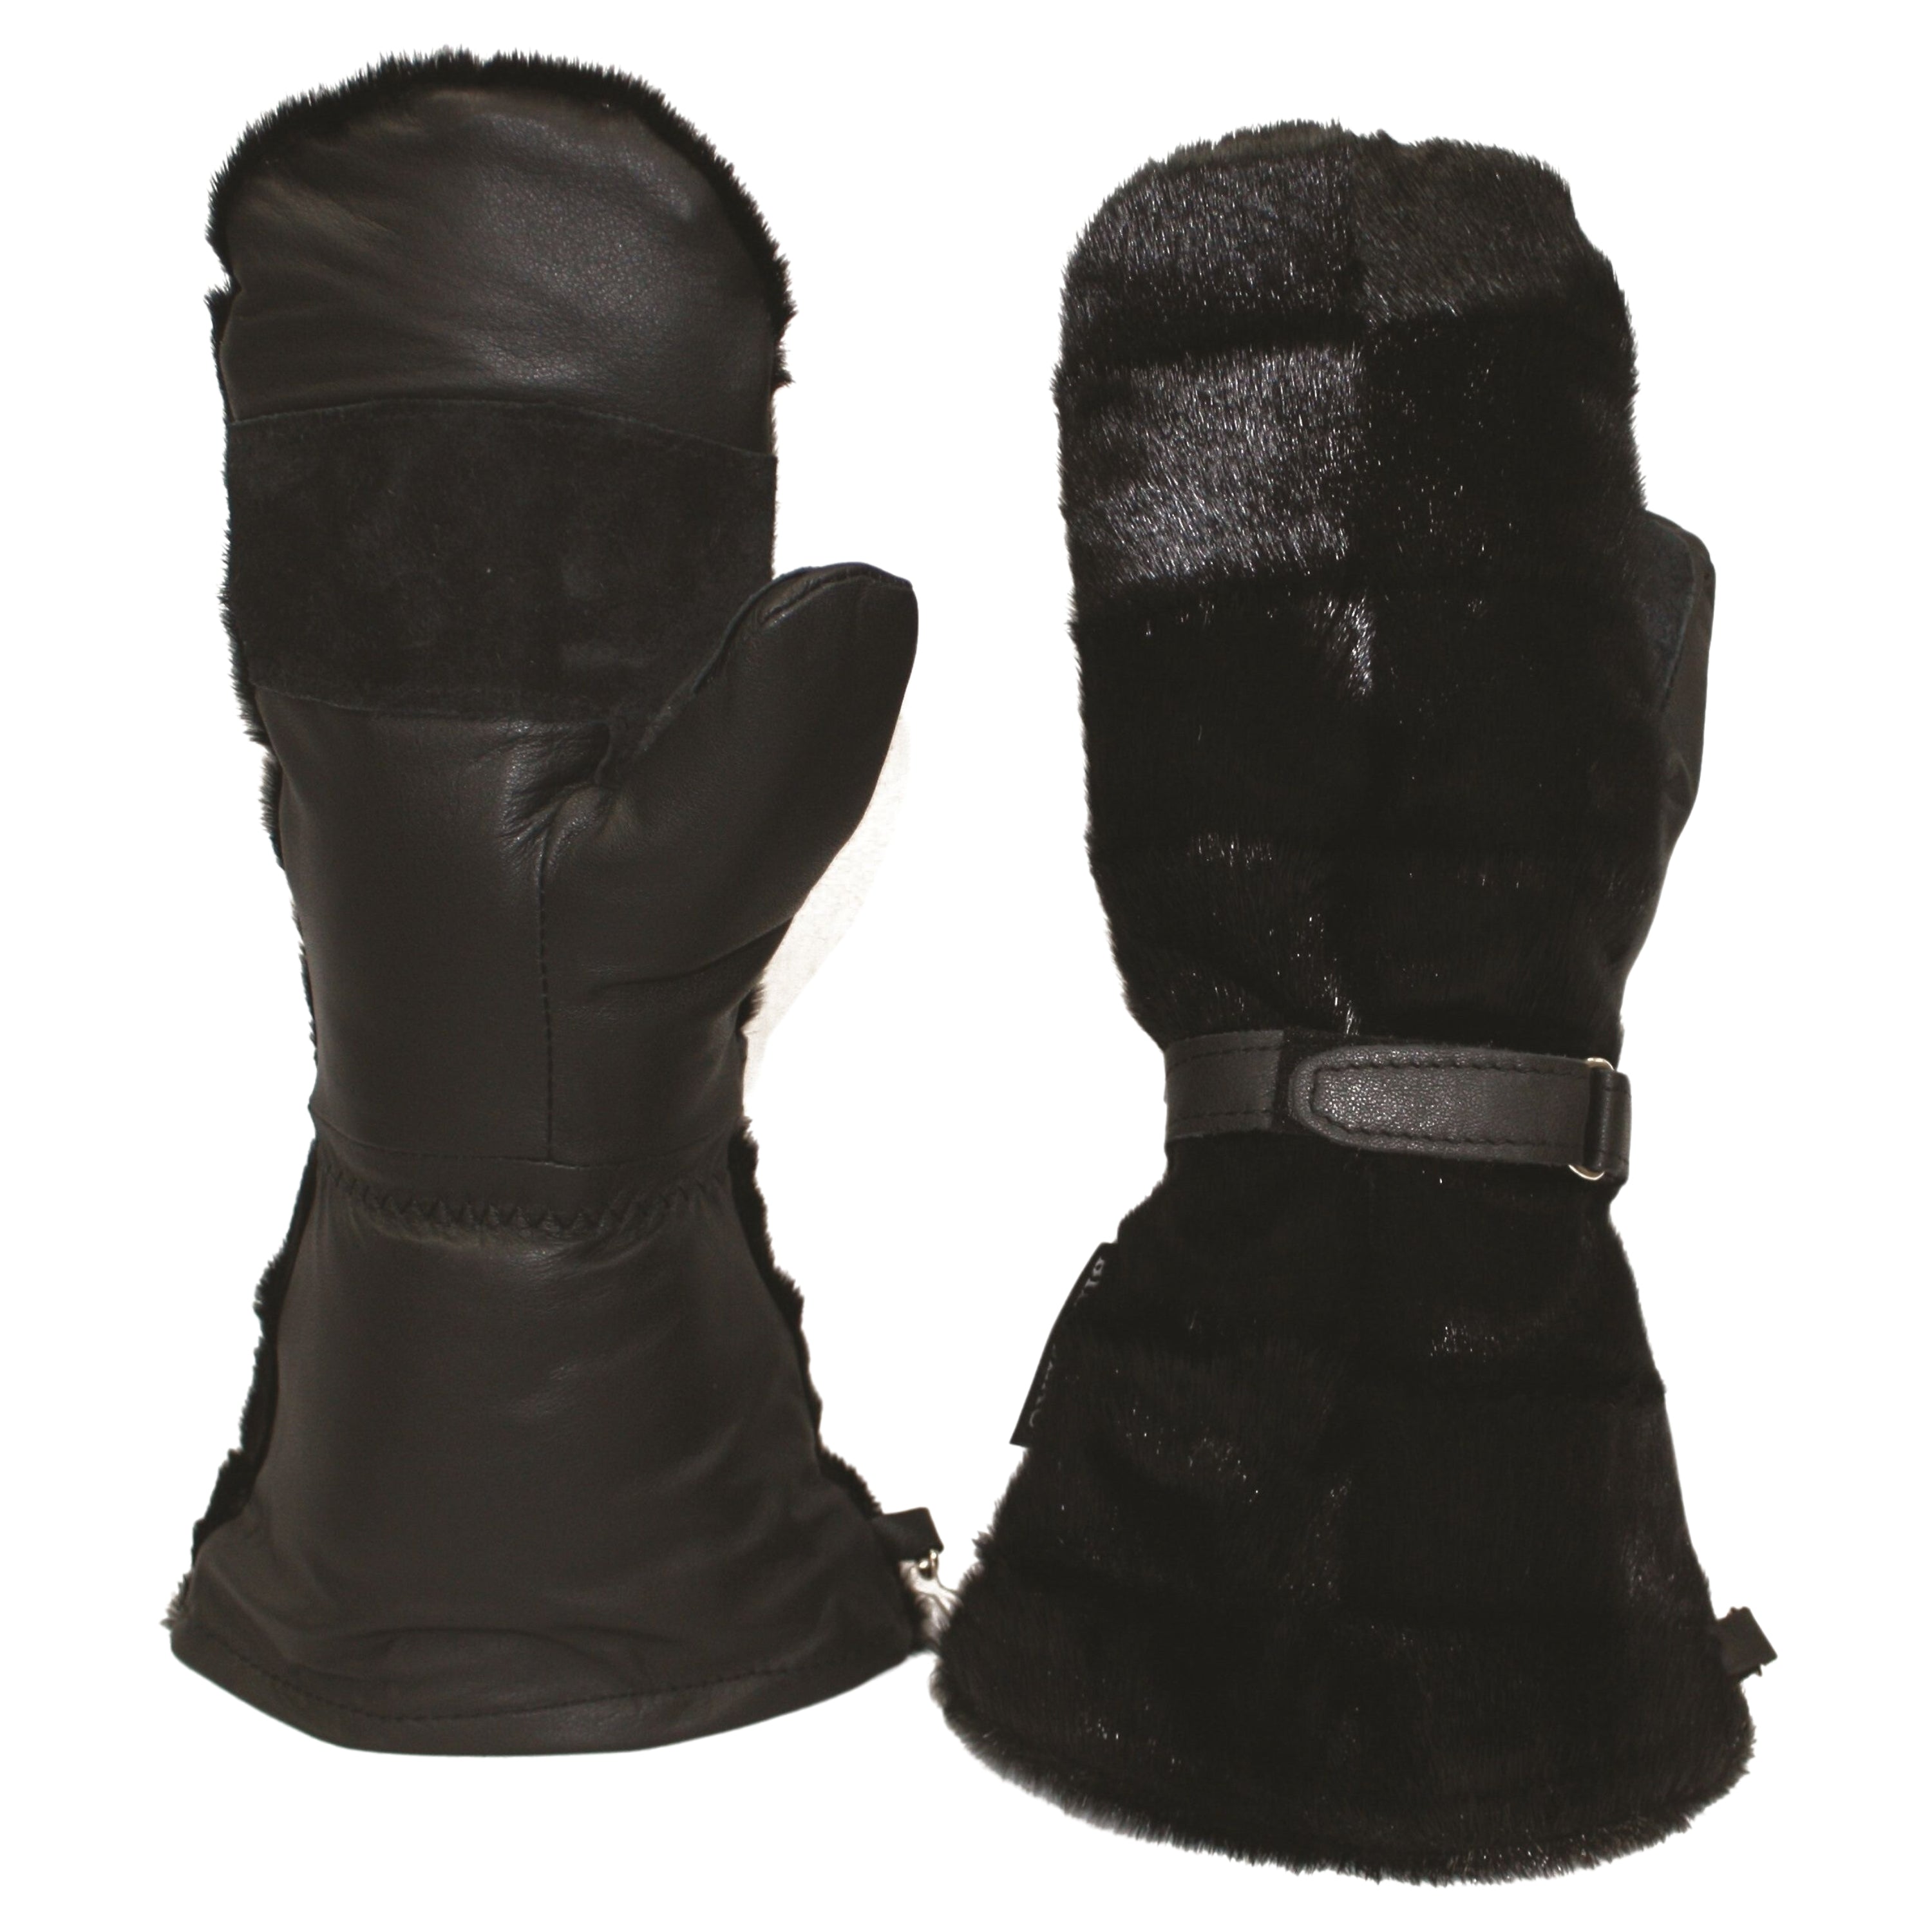 Long seal fur mitts "checkered style" - Unisex